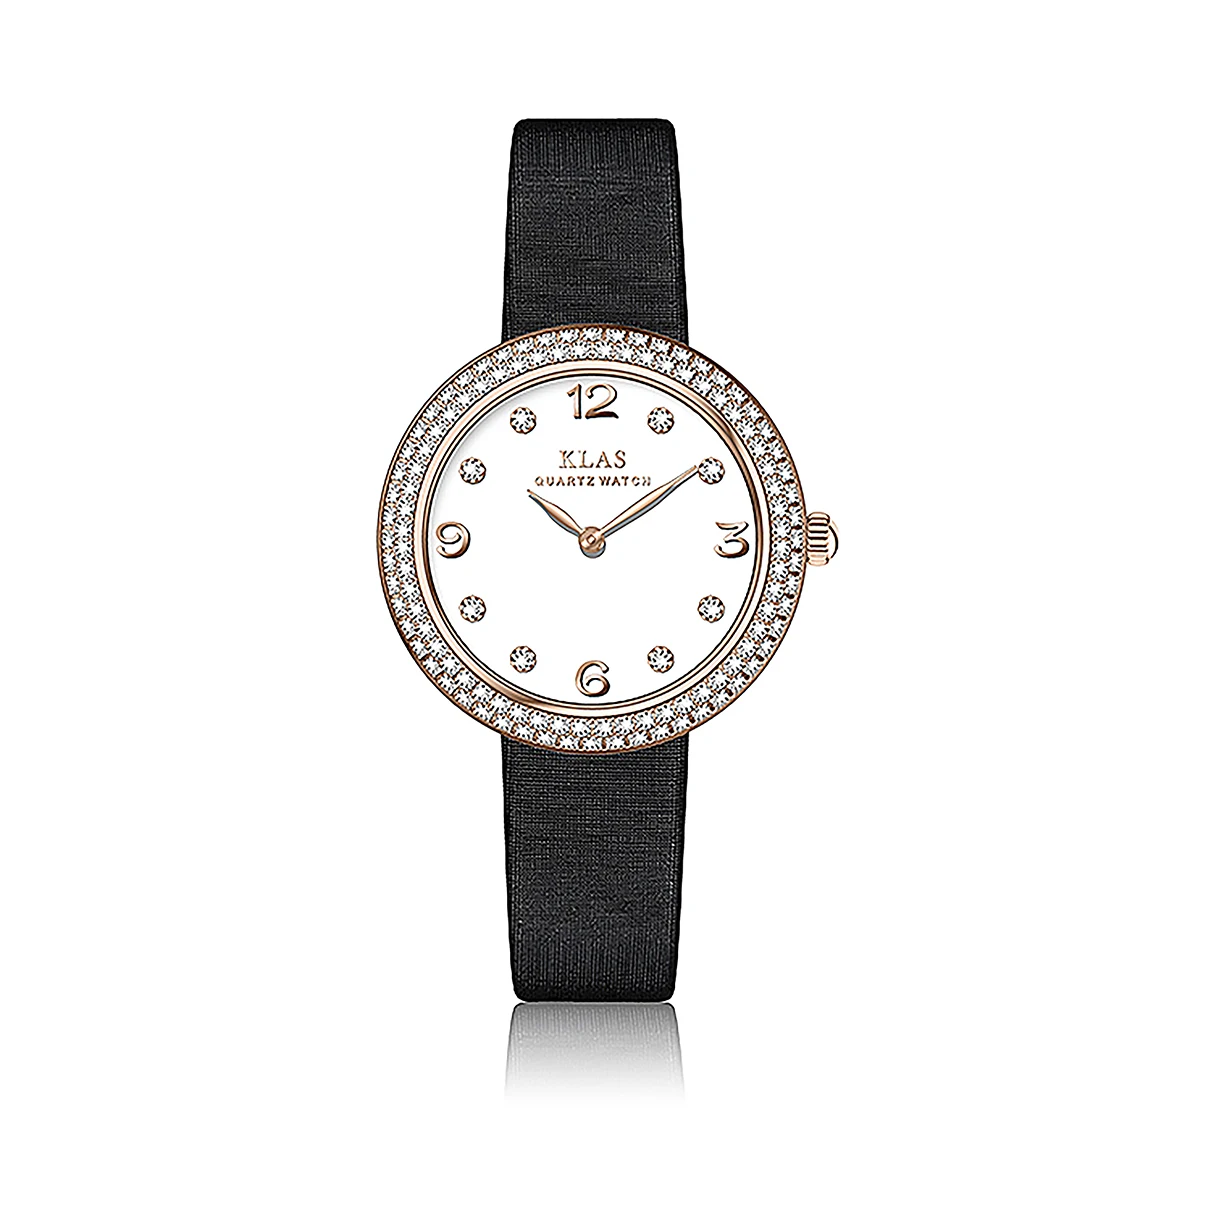 For Girls' Watches High Class Leather Small Round Face Stone Quartz часы женские